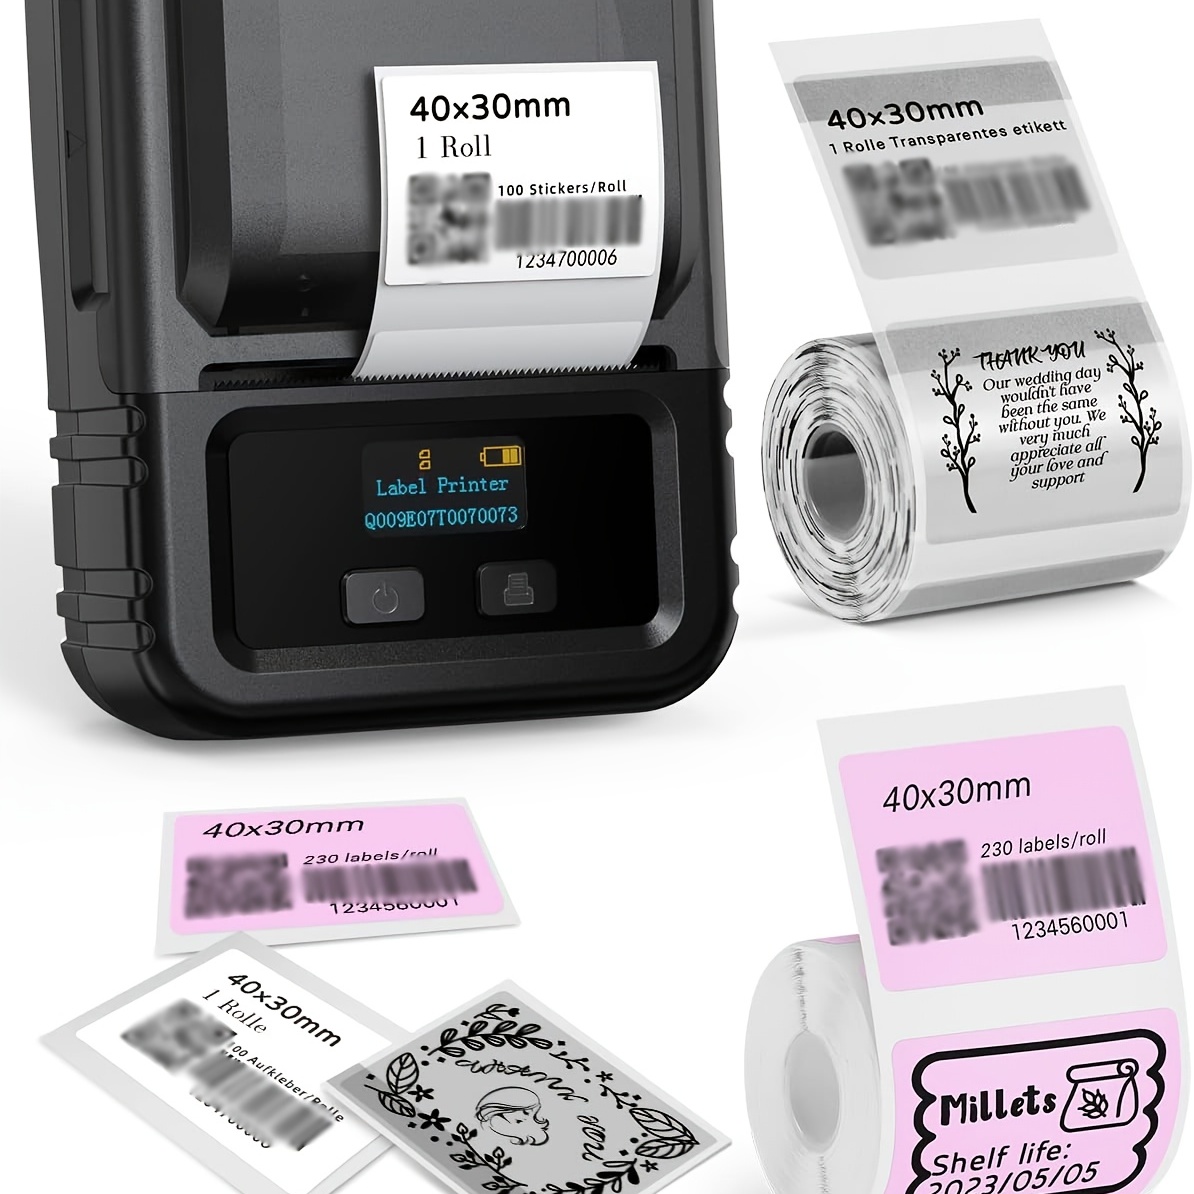 Phomemo M110 M120 Bluetooth Wireless Label Printer 20-50mm Label Maker  Machine for Logo Tags Clothing